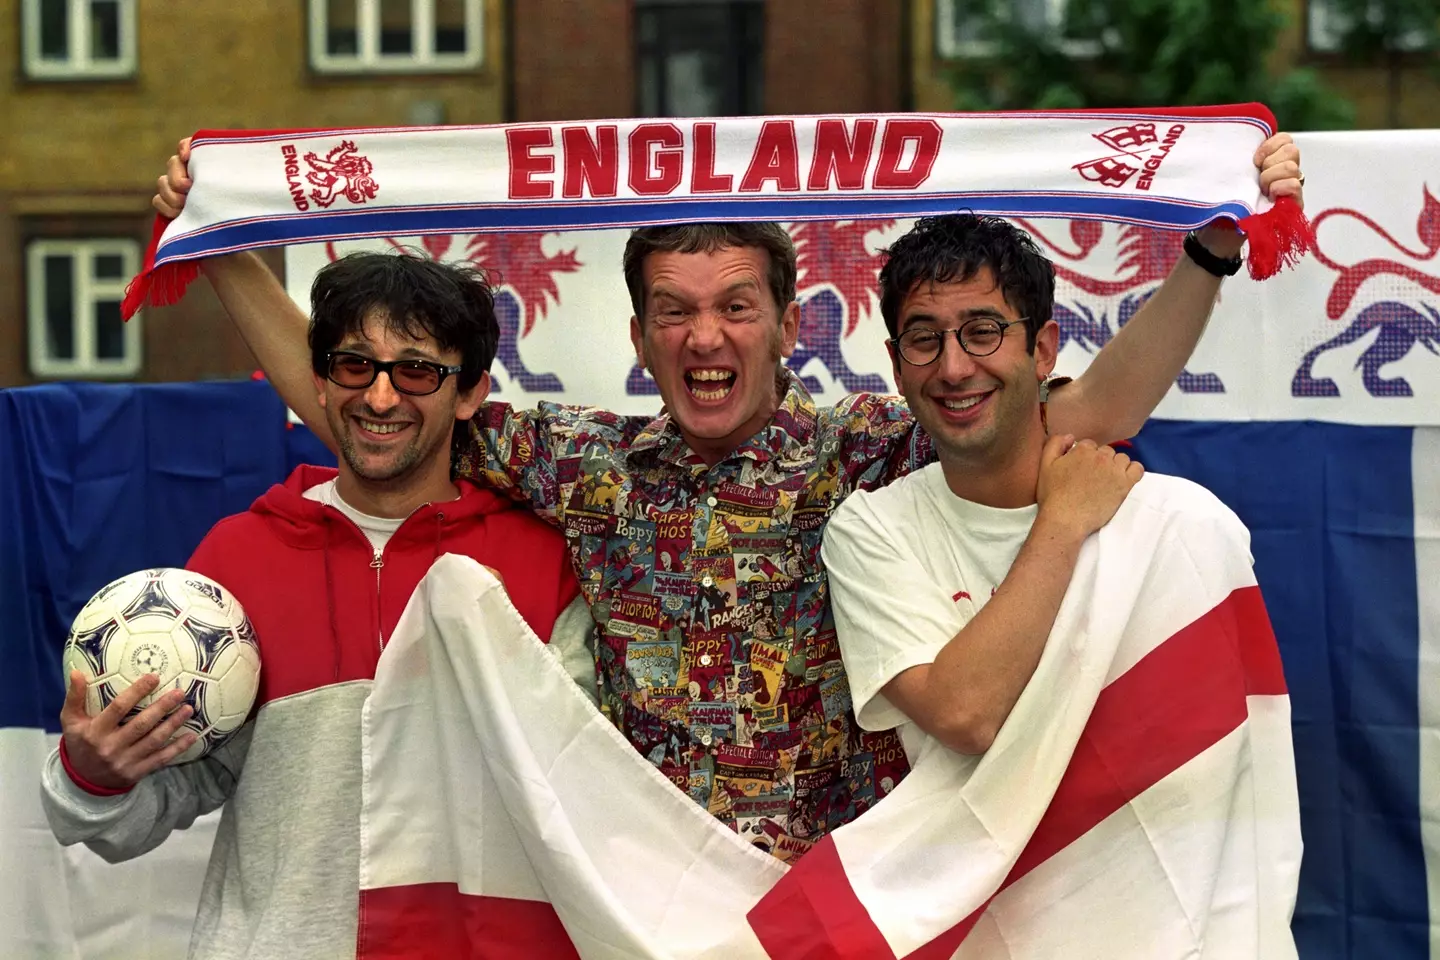 'Three Lions' was first released ahead of the Euro 1996 in England (Image: Alamy)